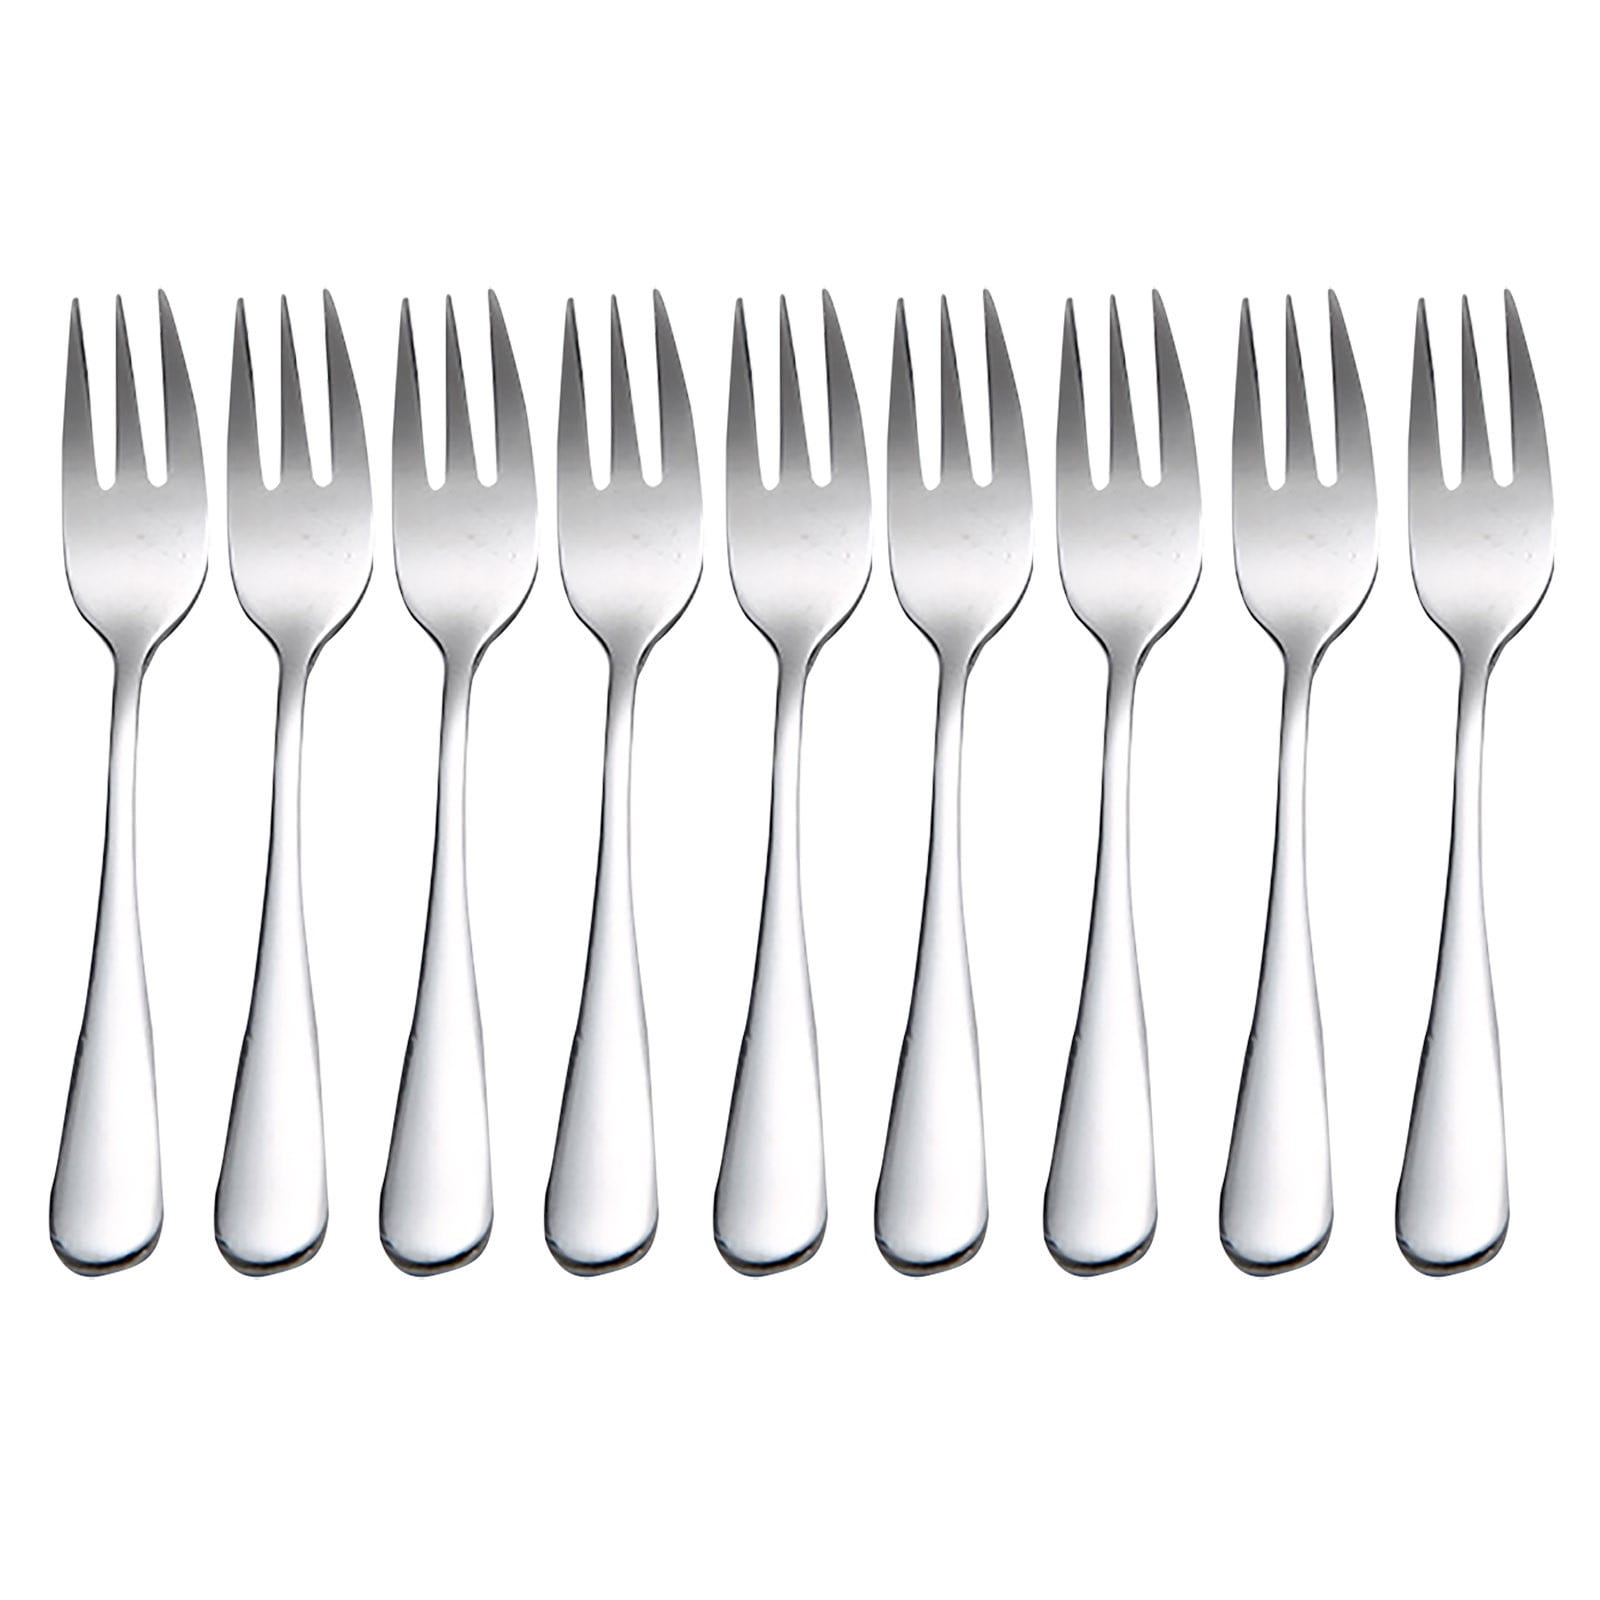 8 x Pastry Cake Forks Stainless Steel Dessert Fork Dining Cutlery New 